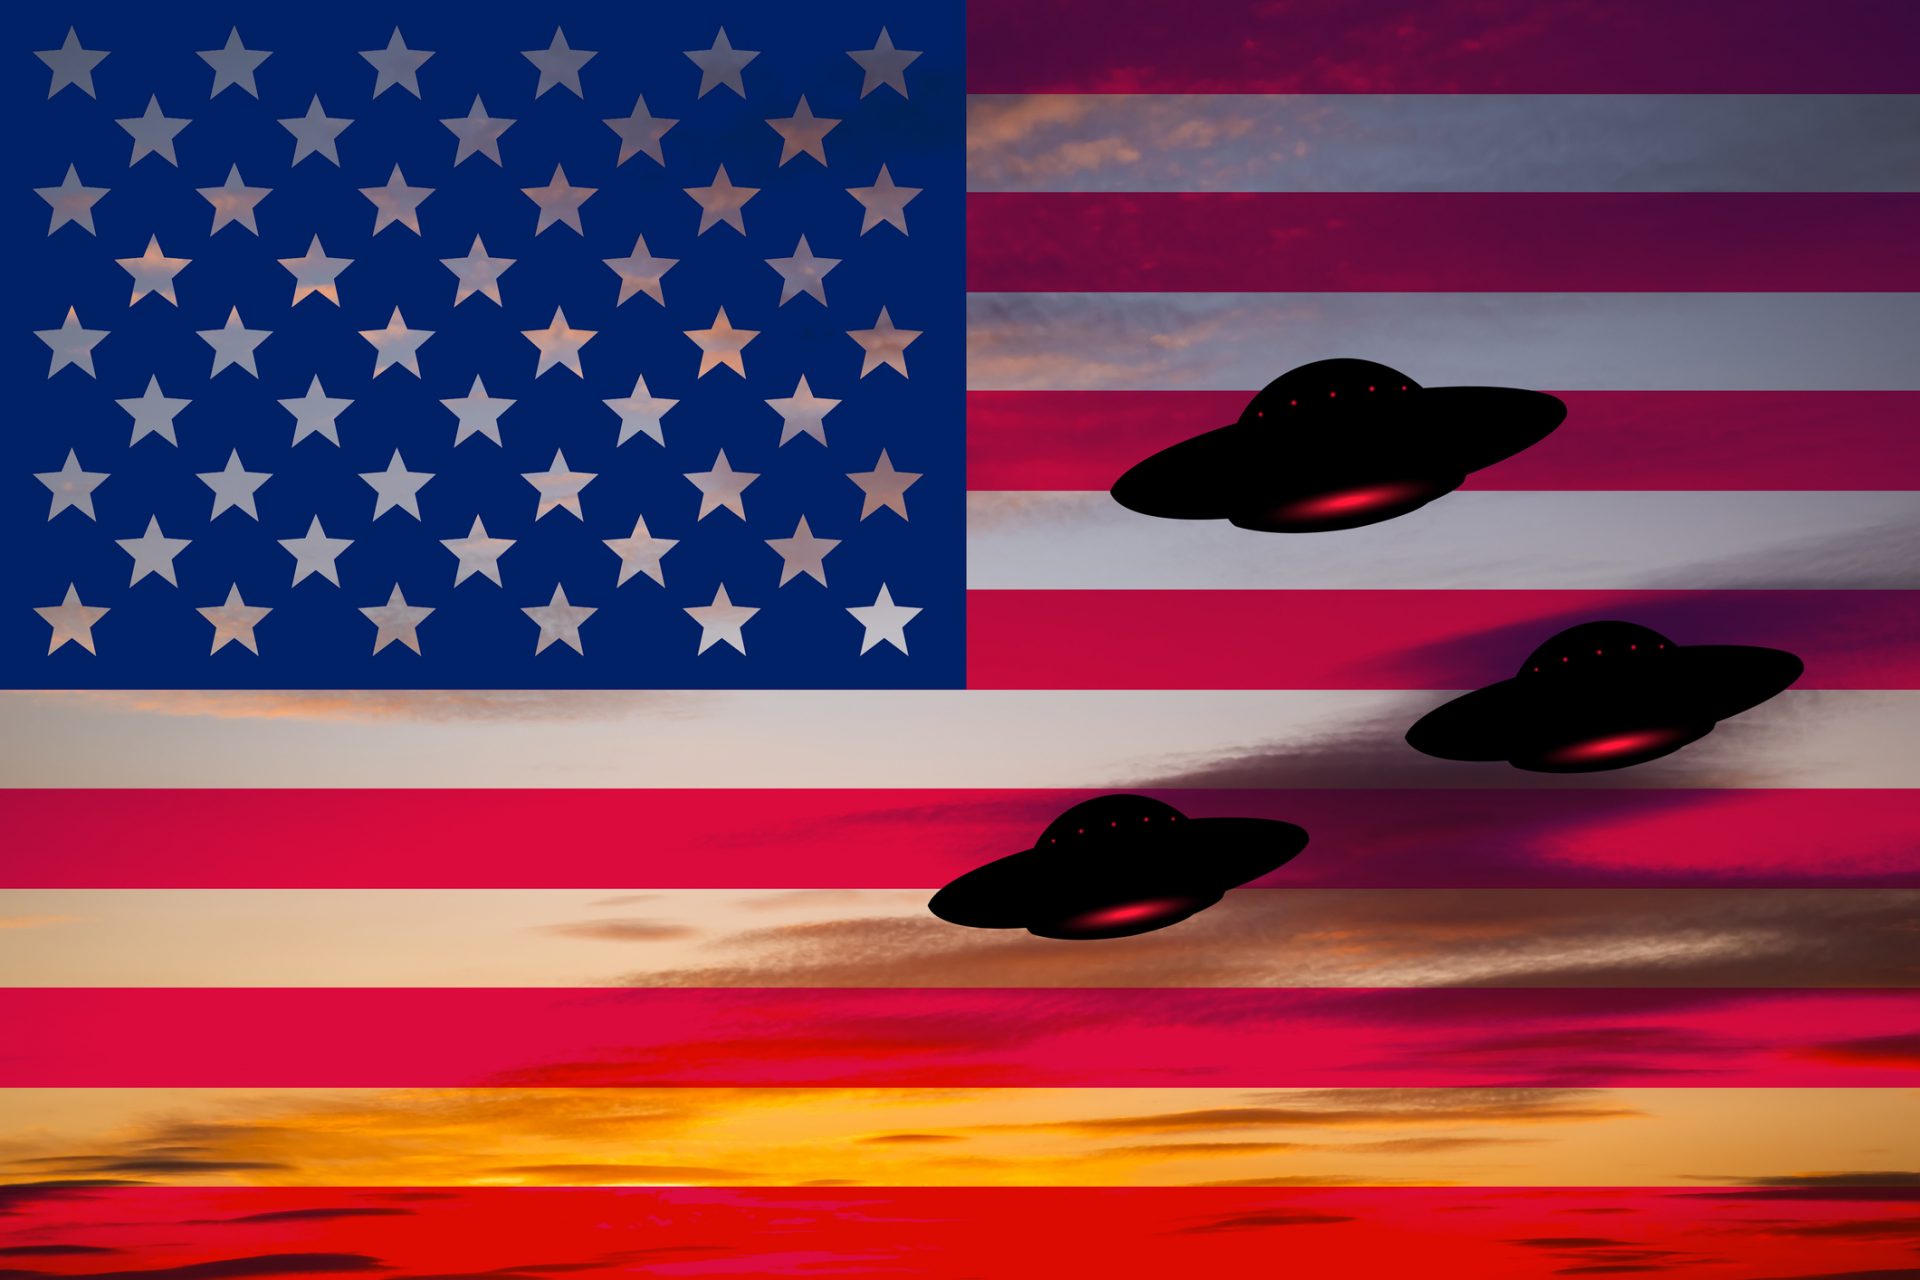 The United States has never recovered an alien body or a spaceship